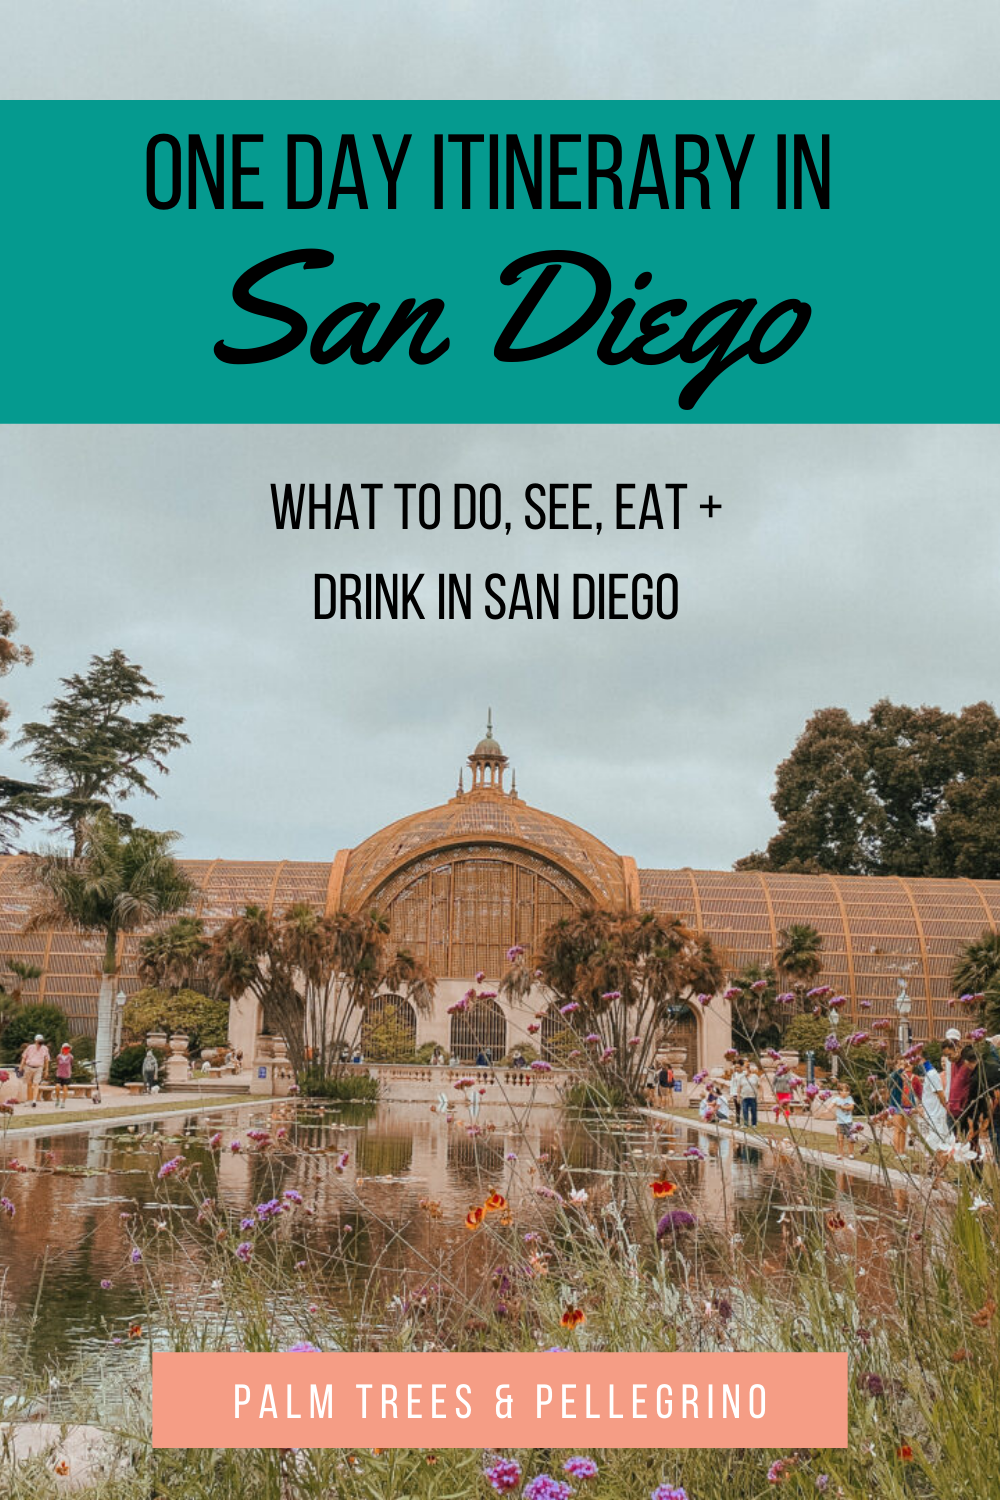 How to spend one day in San Diego itinerary - Palm Trees and Pellegrino San Diego and California travel tips